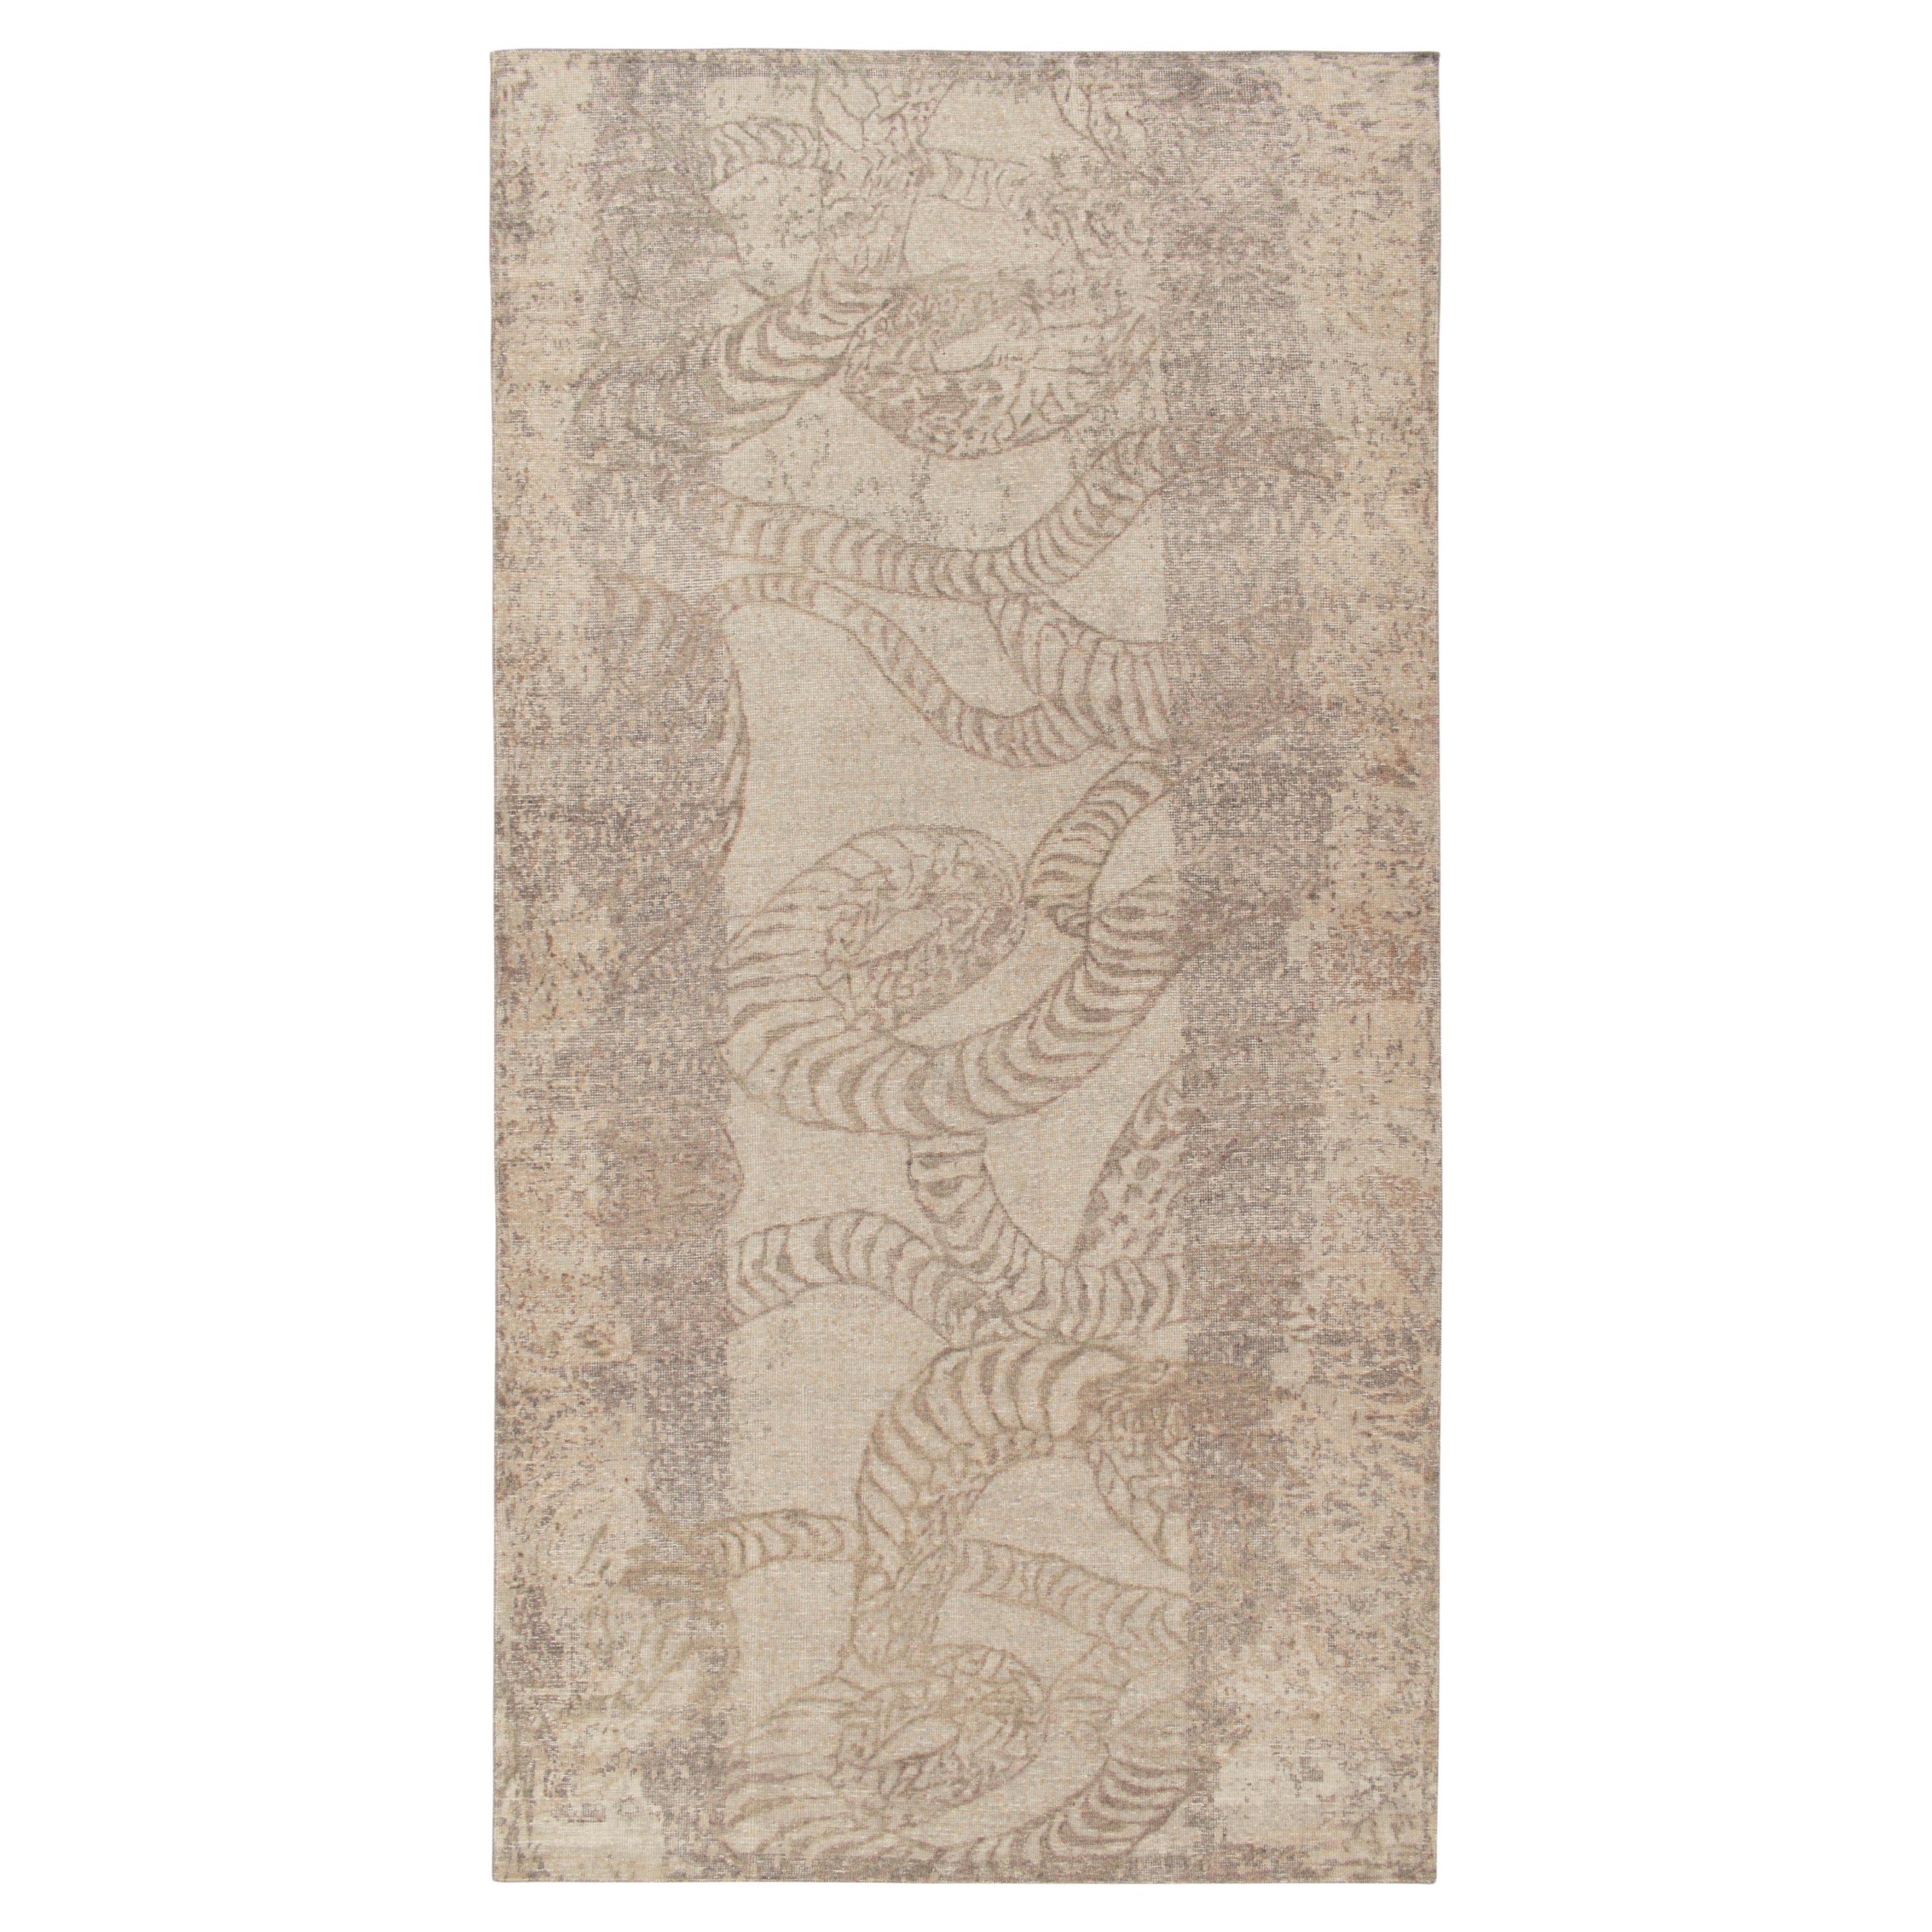 Rug & Kilim's Distressed Style Abstract Rug in Beige-Brown & Gray Pattern